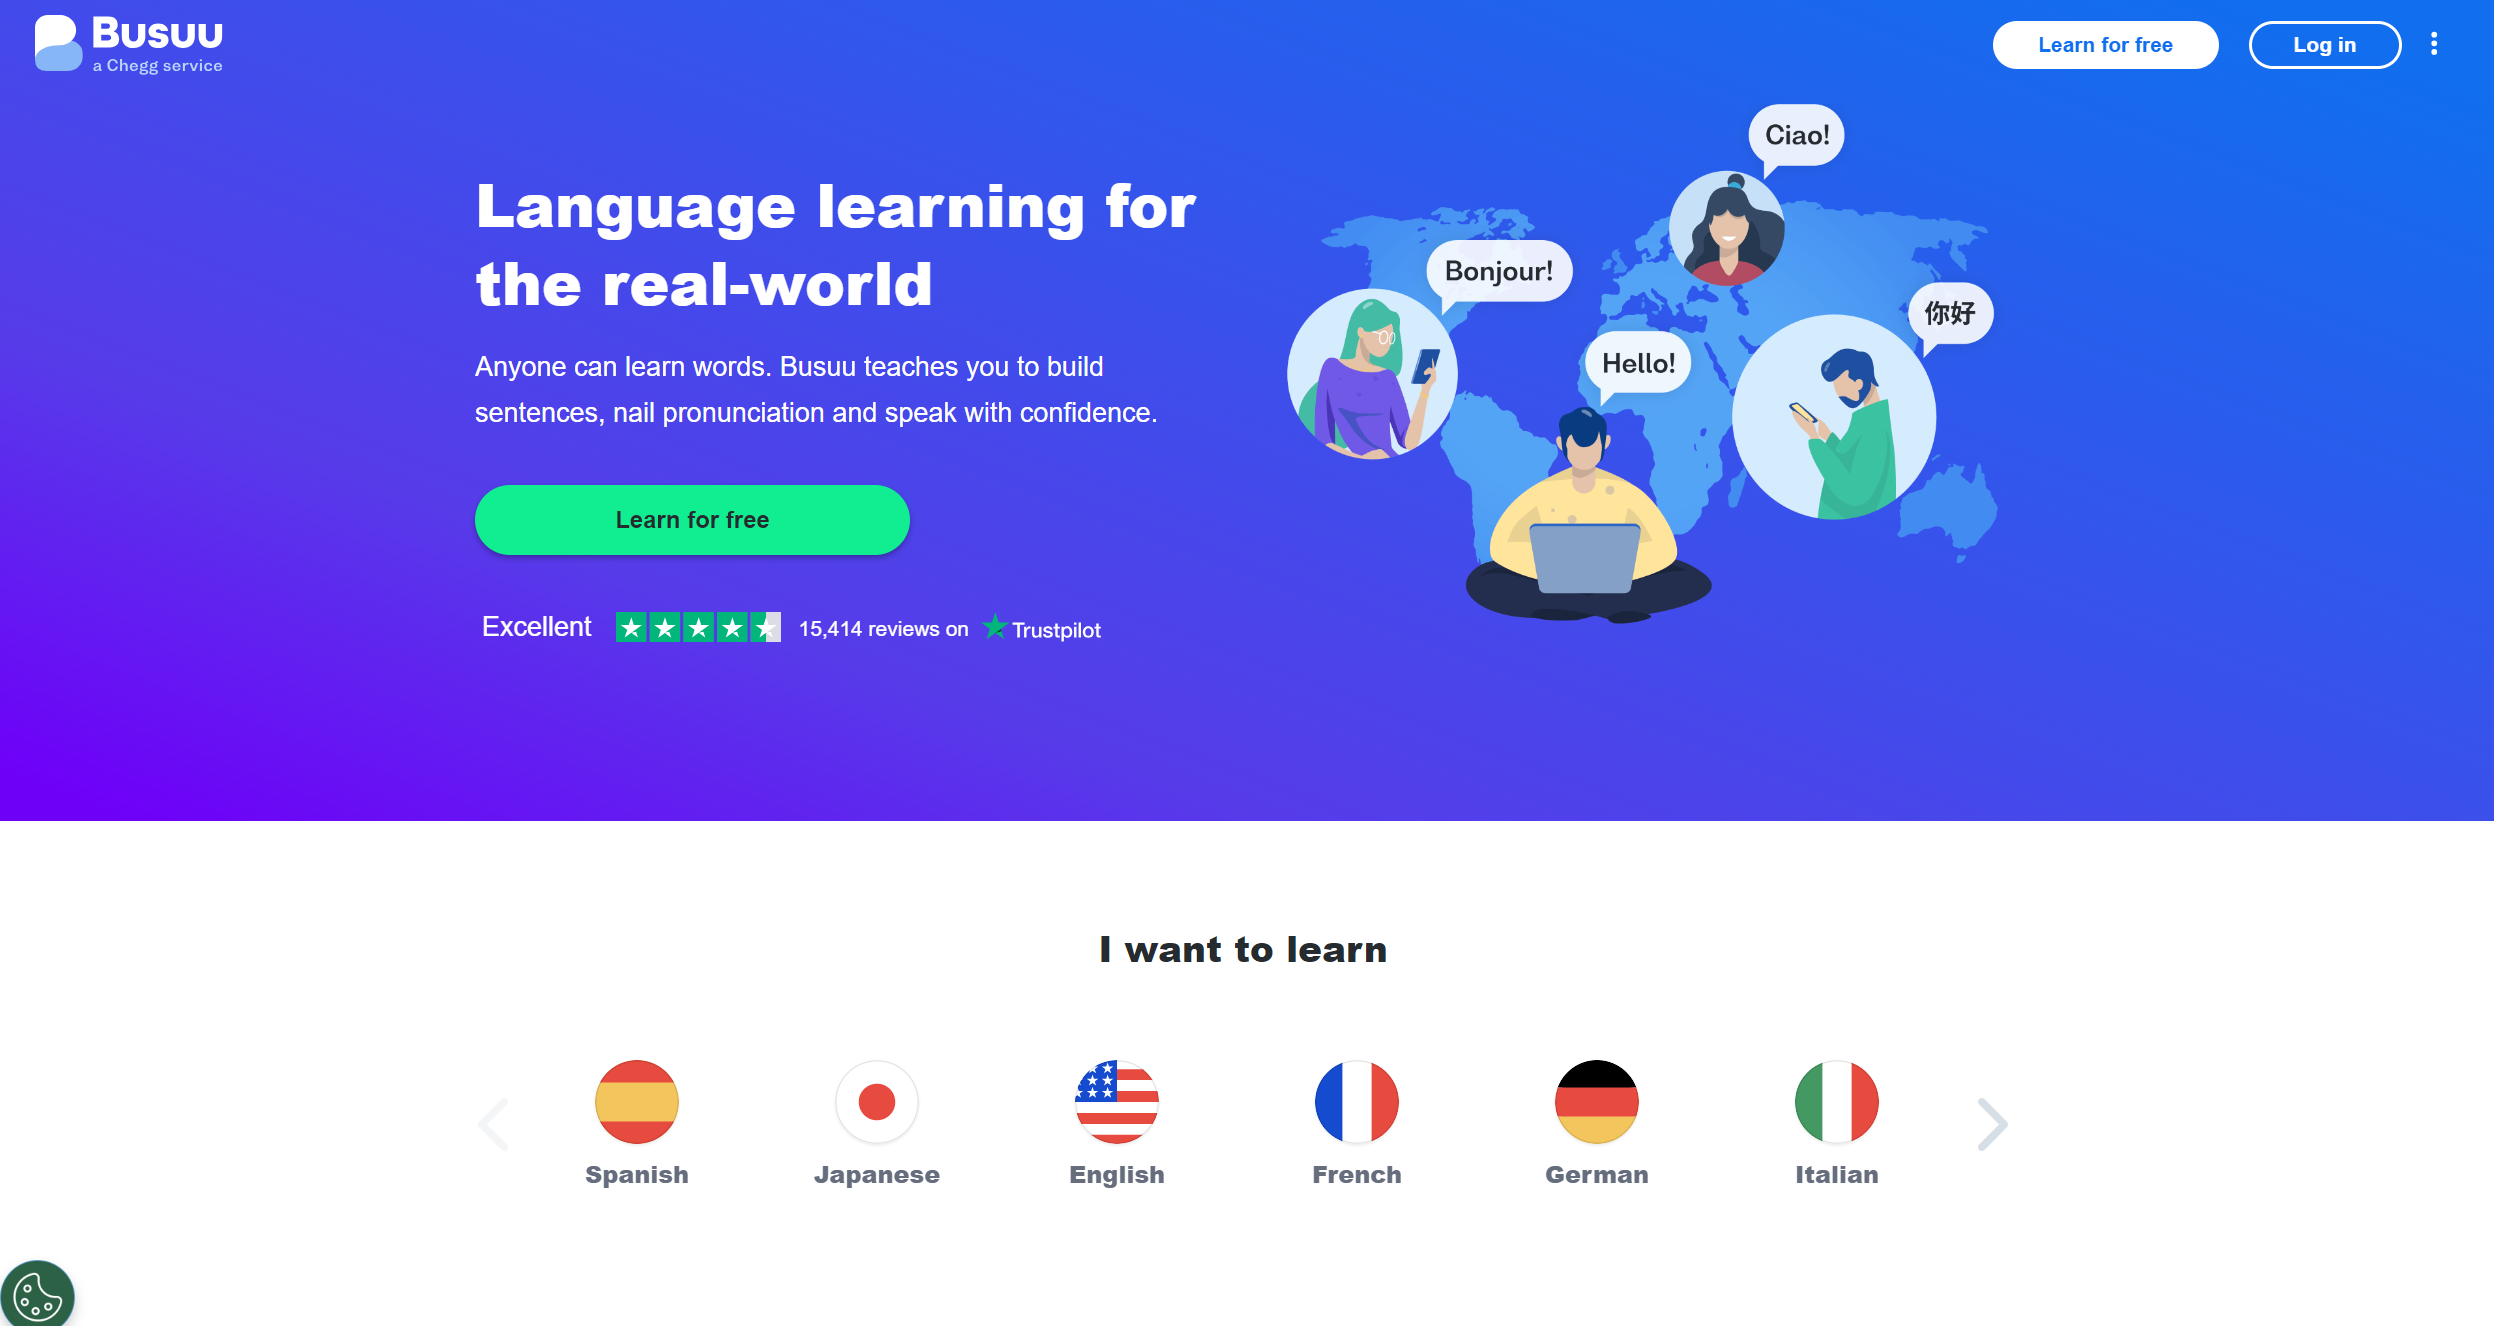 The purple and blue homepage for Busuu, which features a map and images of people saying hello in different languages.